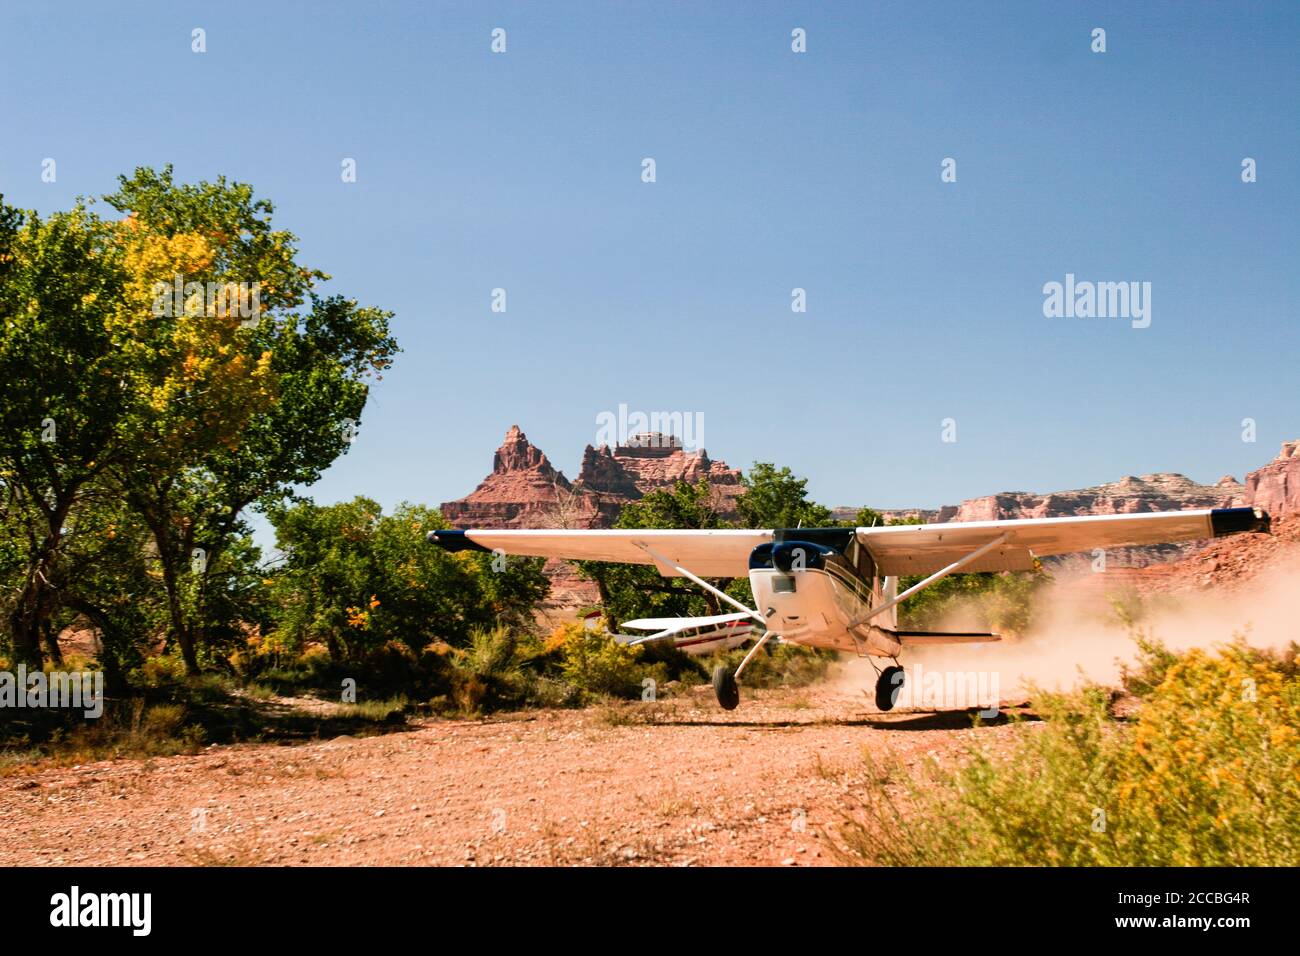 A Cessna 185 Skywagon of the Utah Backcountry Pilots Association takes off from the remote Mexican Mountain airstrip on the San Rafael Swell in Utah. Stock Photo